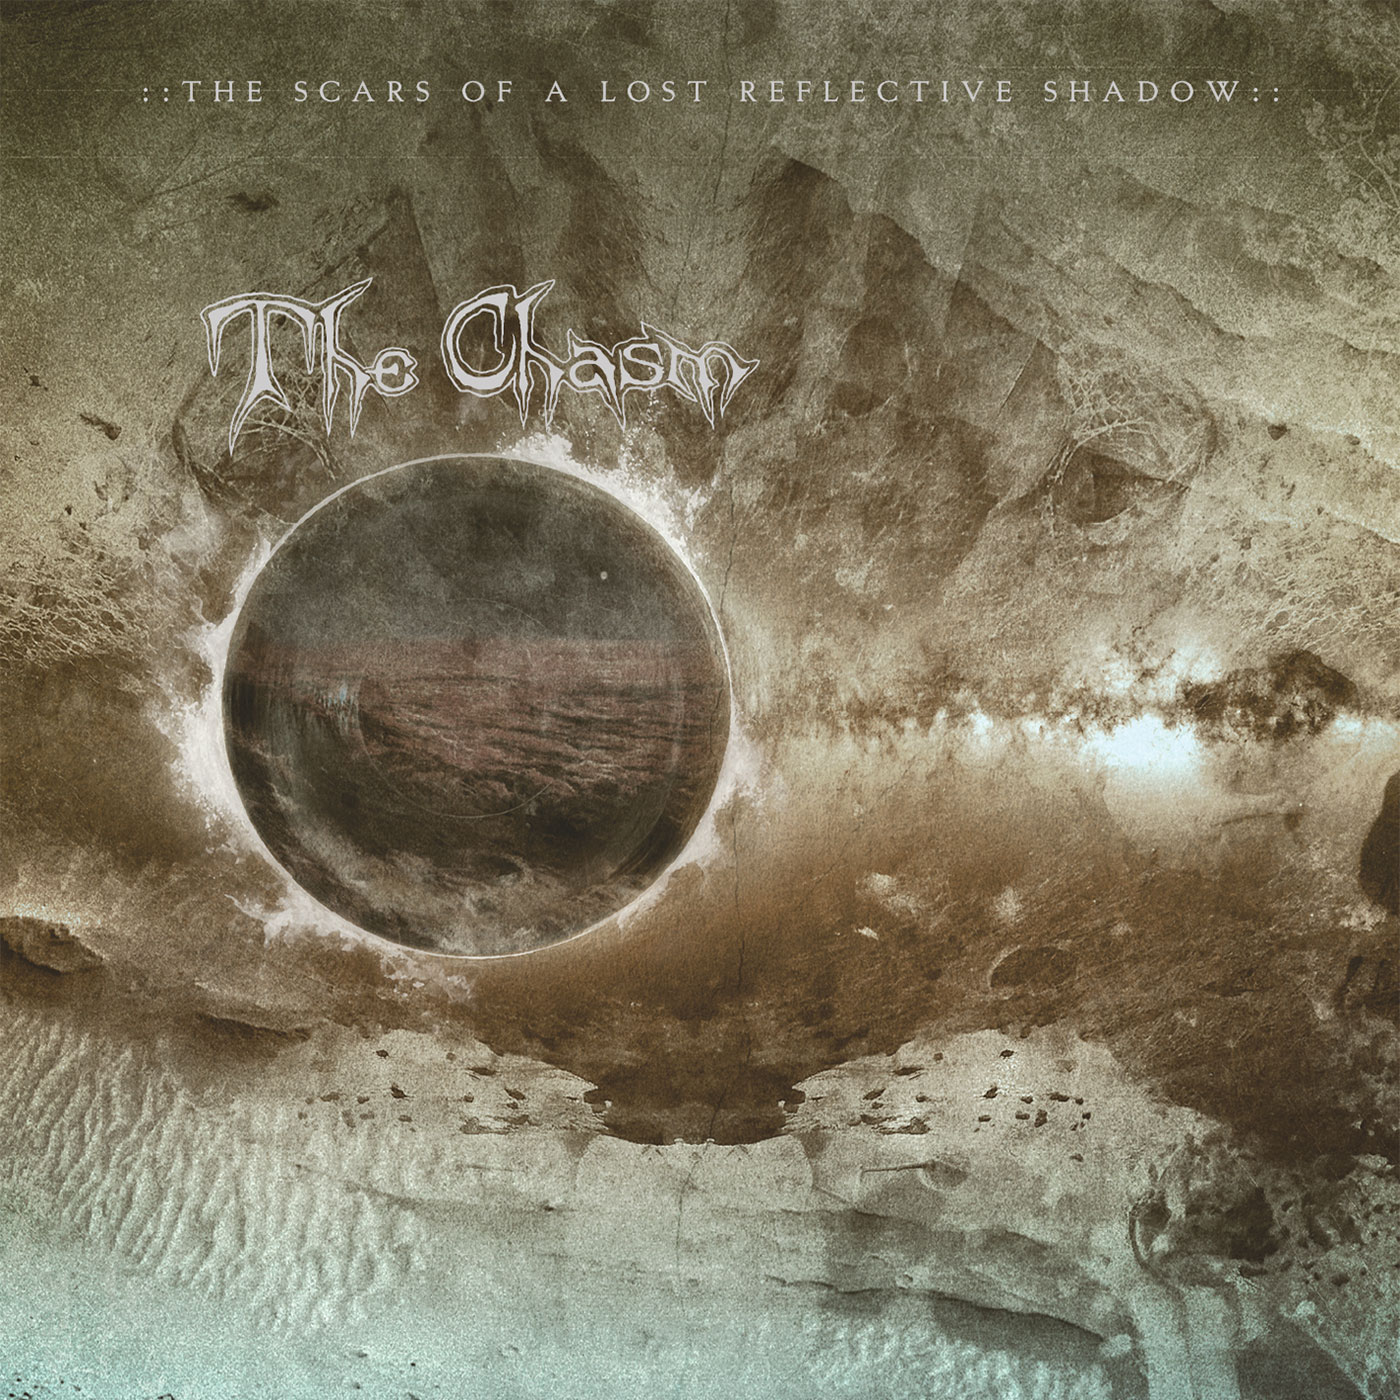 The Chasm The Scars of a Lost Reflective Shadow cover artwork